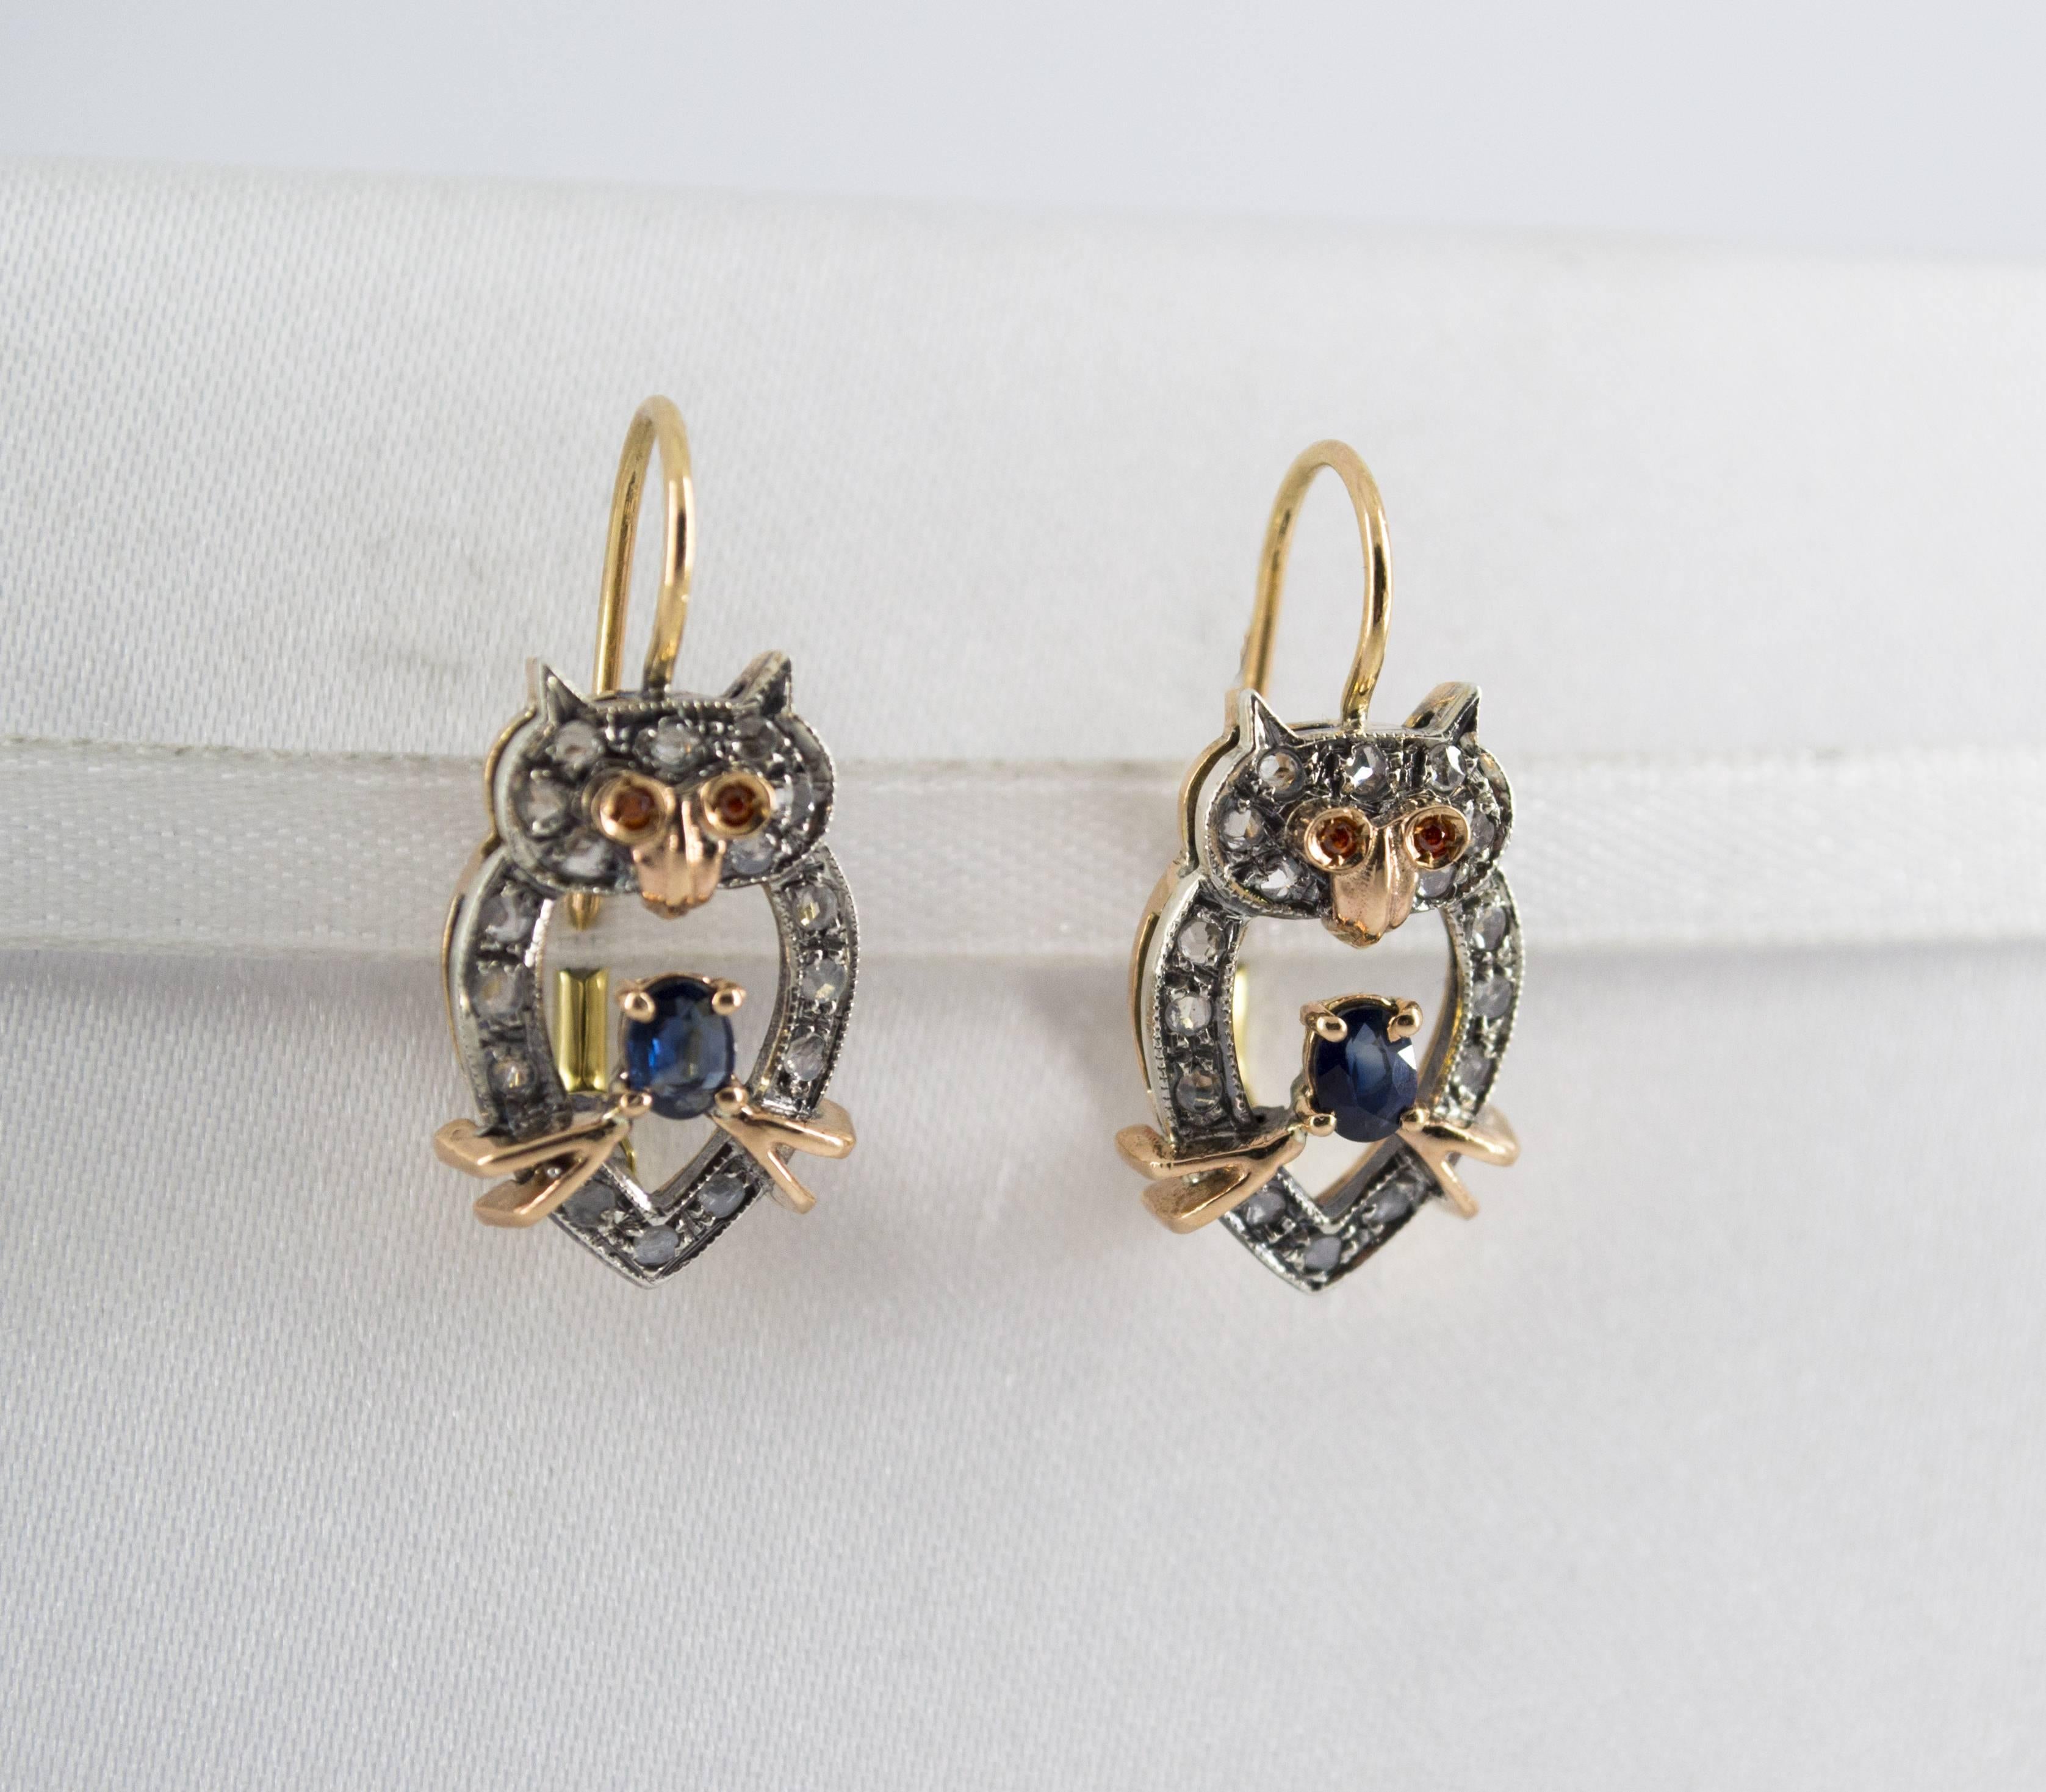 These Earrings are made of 9K Yellow Gold and Sterling Silver.
These Earrings have 0.20 Carats of Diamonds.
These Earrings have 0.02 Carats of Rubies.
These Earrings have a 0.50 Carats Blue Sapphire.
They're also available with a 0.50 Carat Emerald